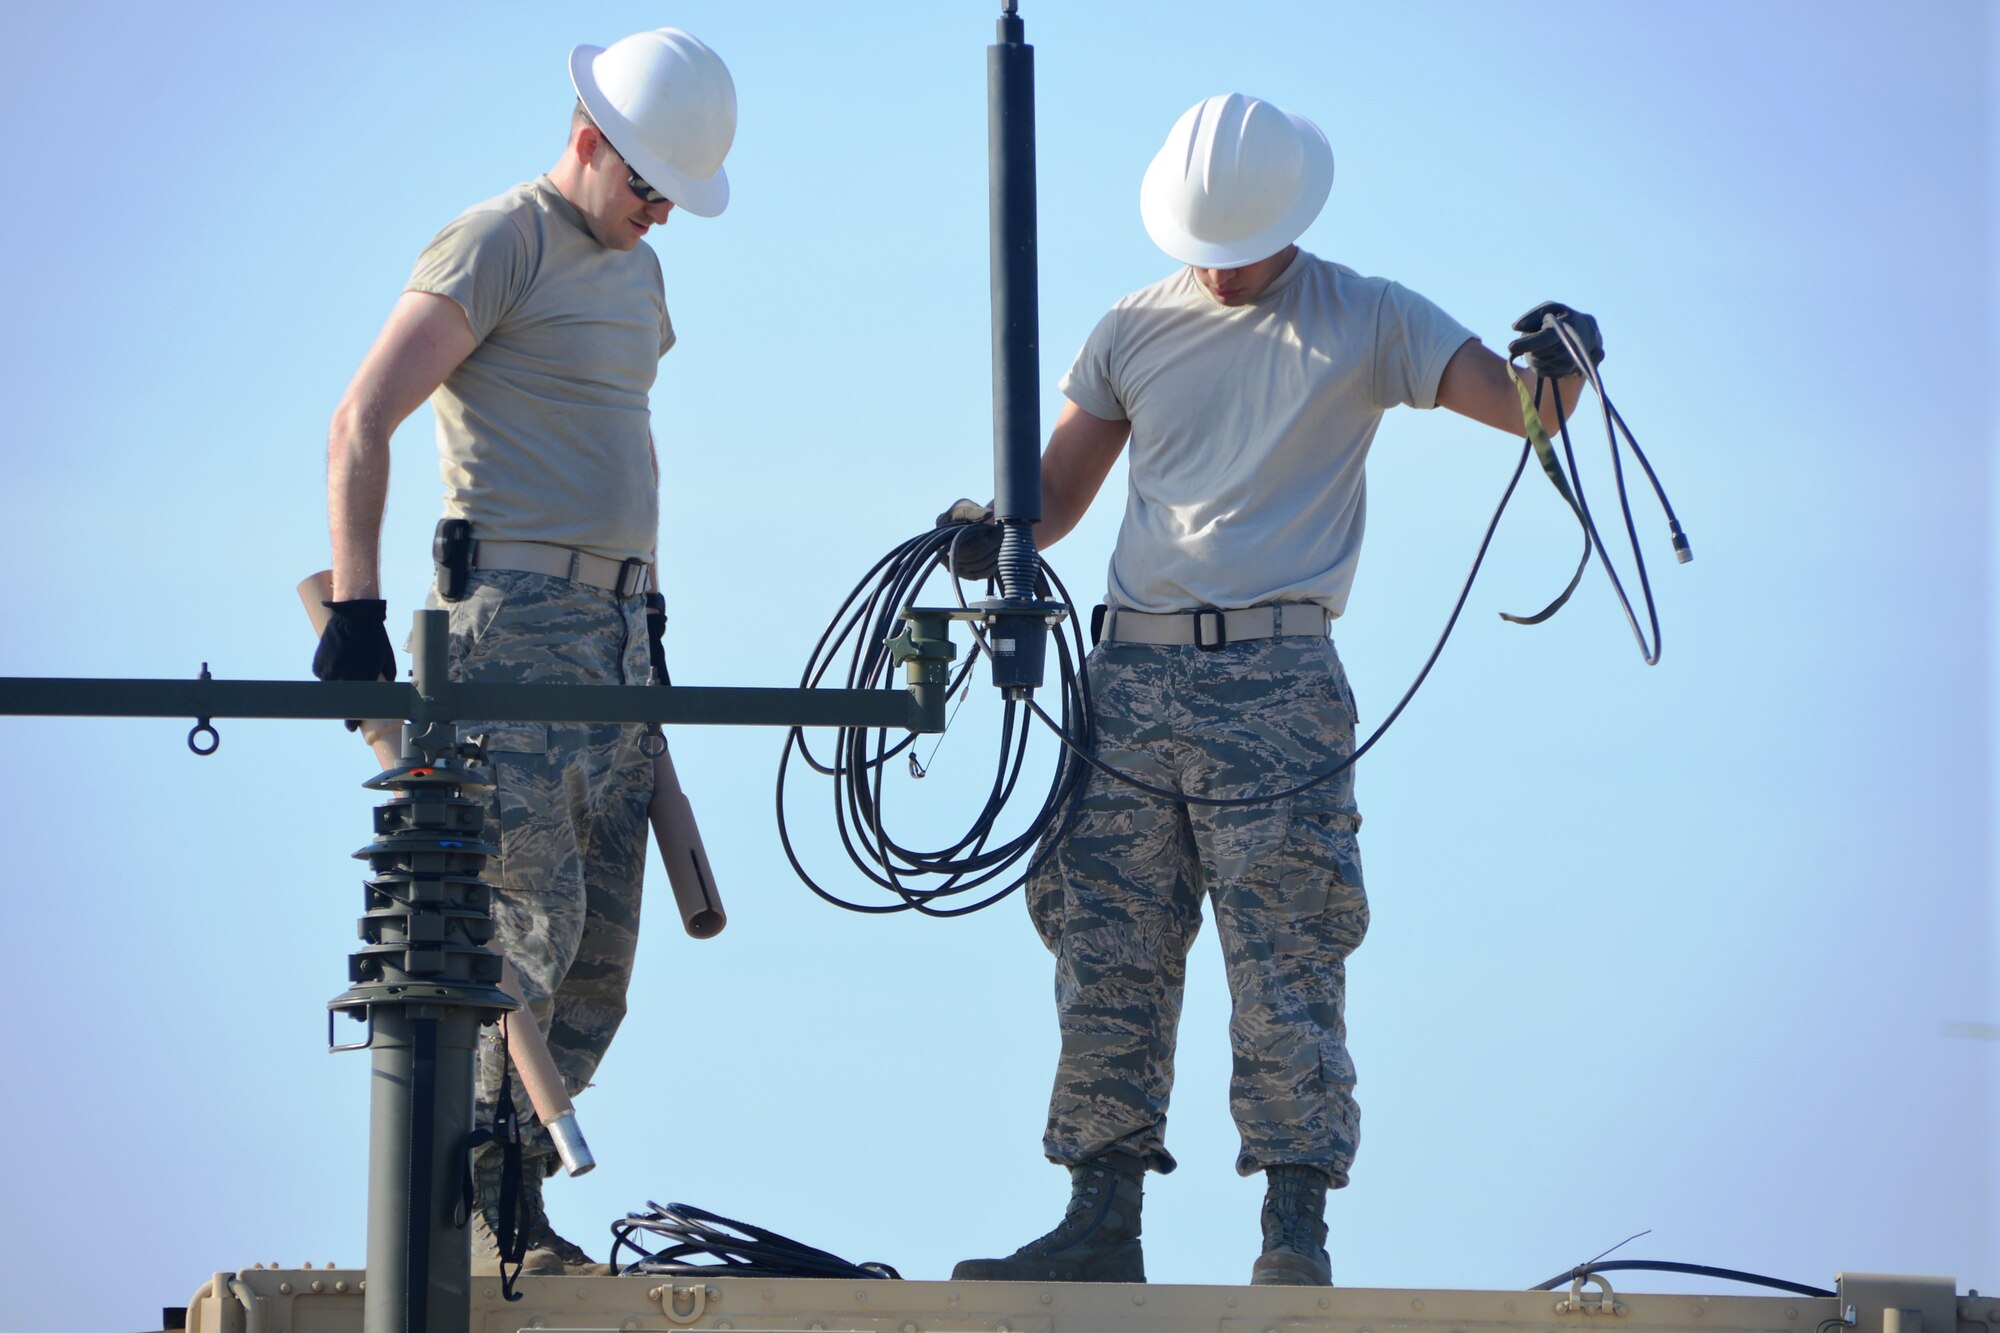 Senior Airmen Michael Washburn and Juan Arenas from the 433rd Aeromedical Evacuation Squadron, Joint Base San Antonio-Lackland, Texas set-up a line-of-sight antenna on top of a mobile shelter at Naval Air Station, North Island, Calif., 24 April, 2014 during the Air Force Reserve Command’s Patriot Hook Exercise. (U.S. Air Force photo/Senior Master Sgt. Minnie Jones)


